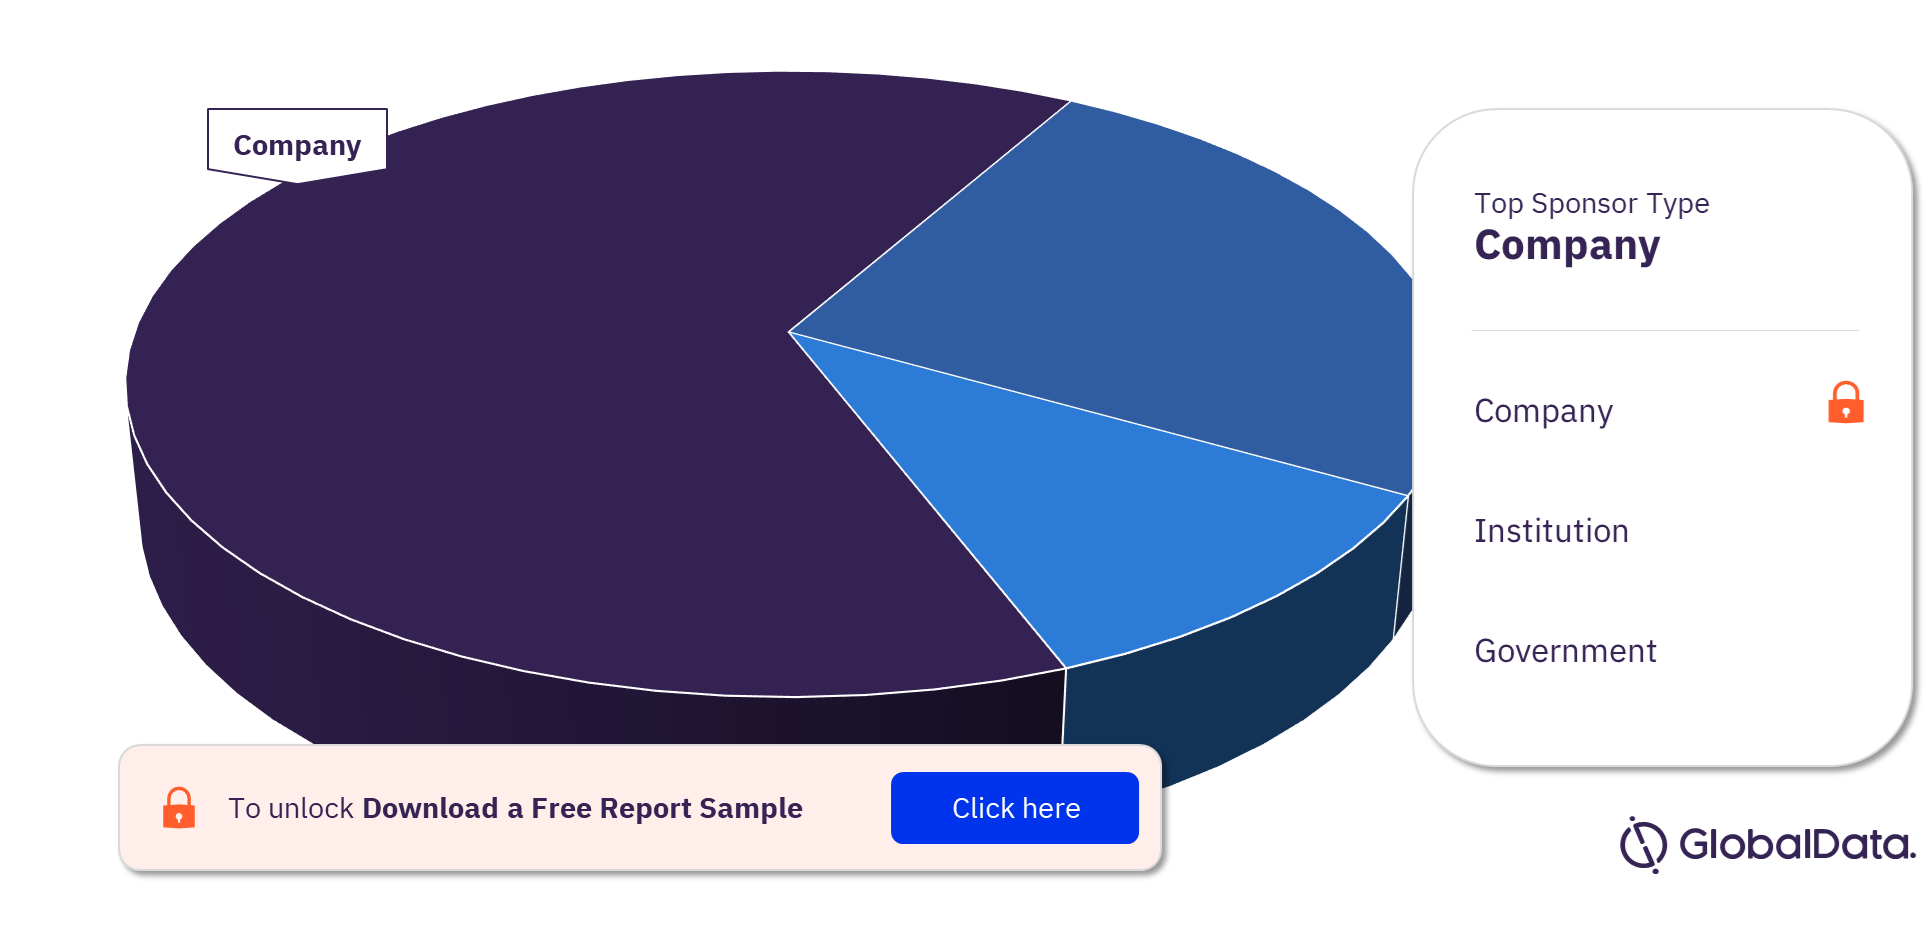 Herpes Zoster Clinical Trials Market Analysis by Sponsor Types, 2023 (%)